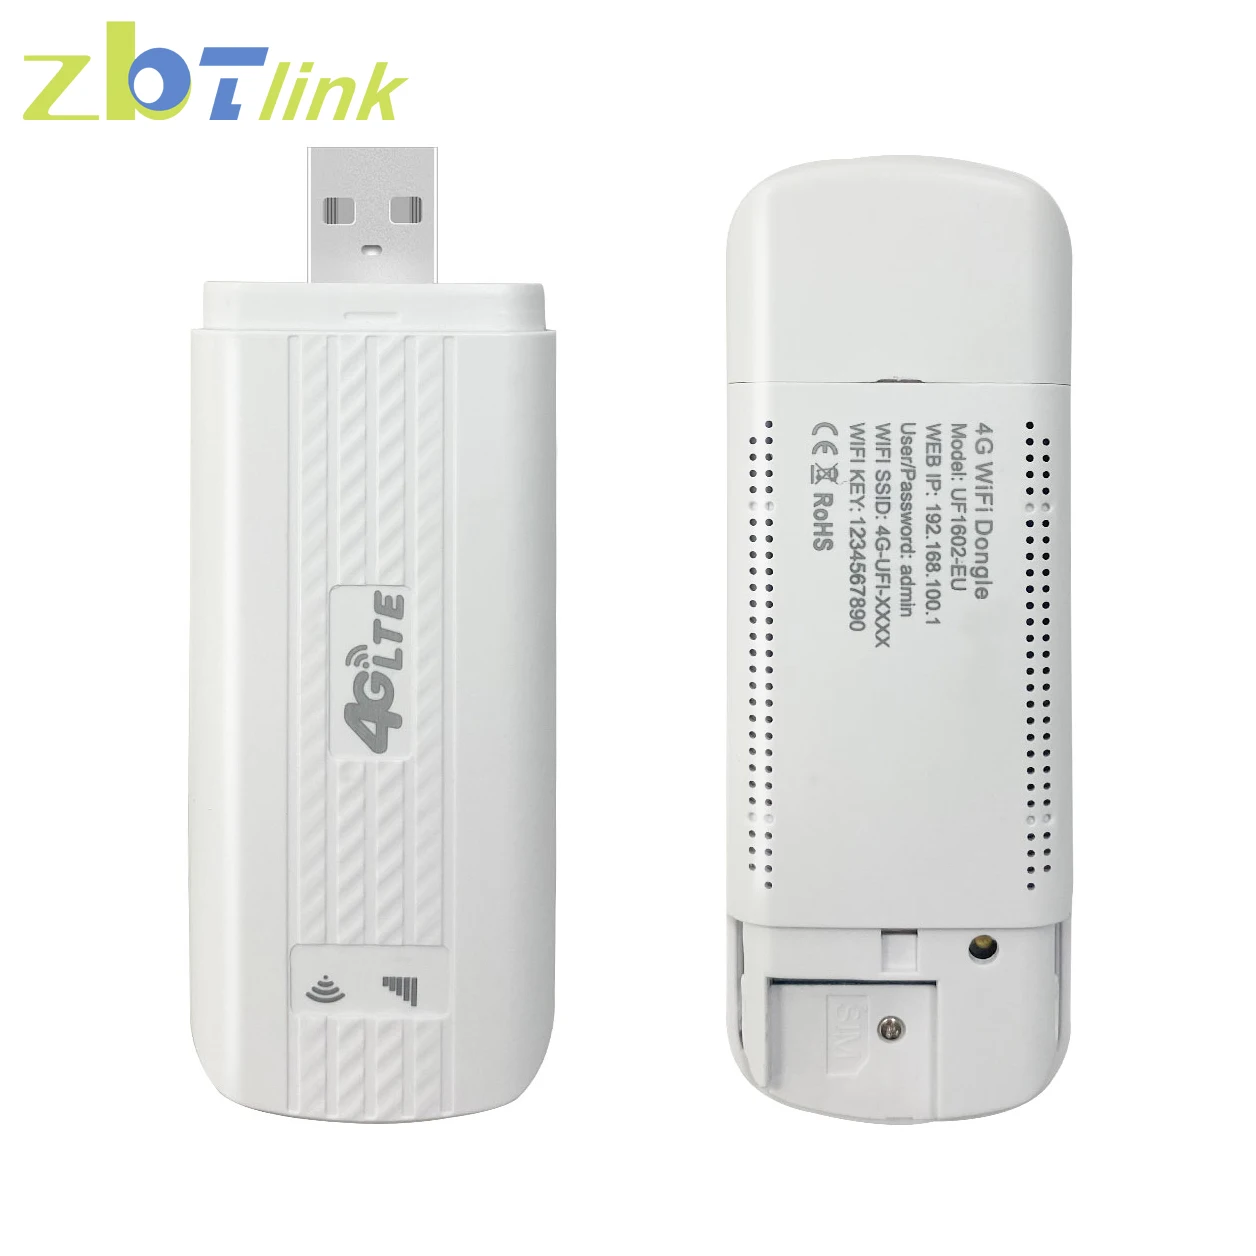 Zbtlink Unlocked Mobile USB 4G LTE Modem Wireless Dongle Wifi Router 150mbps With SIM Card Slot Pocket For Car Yacht Outdoor